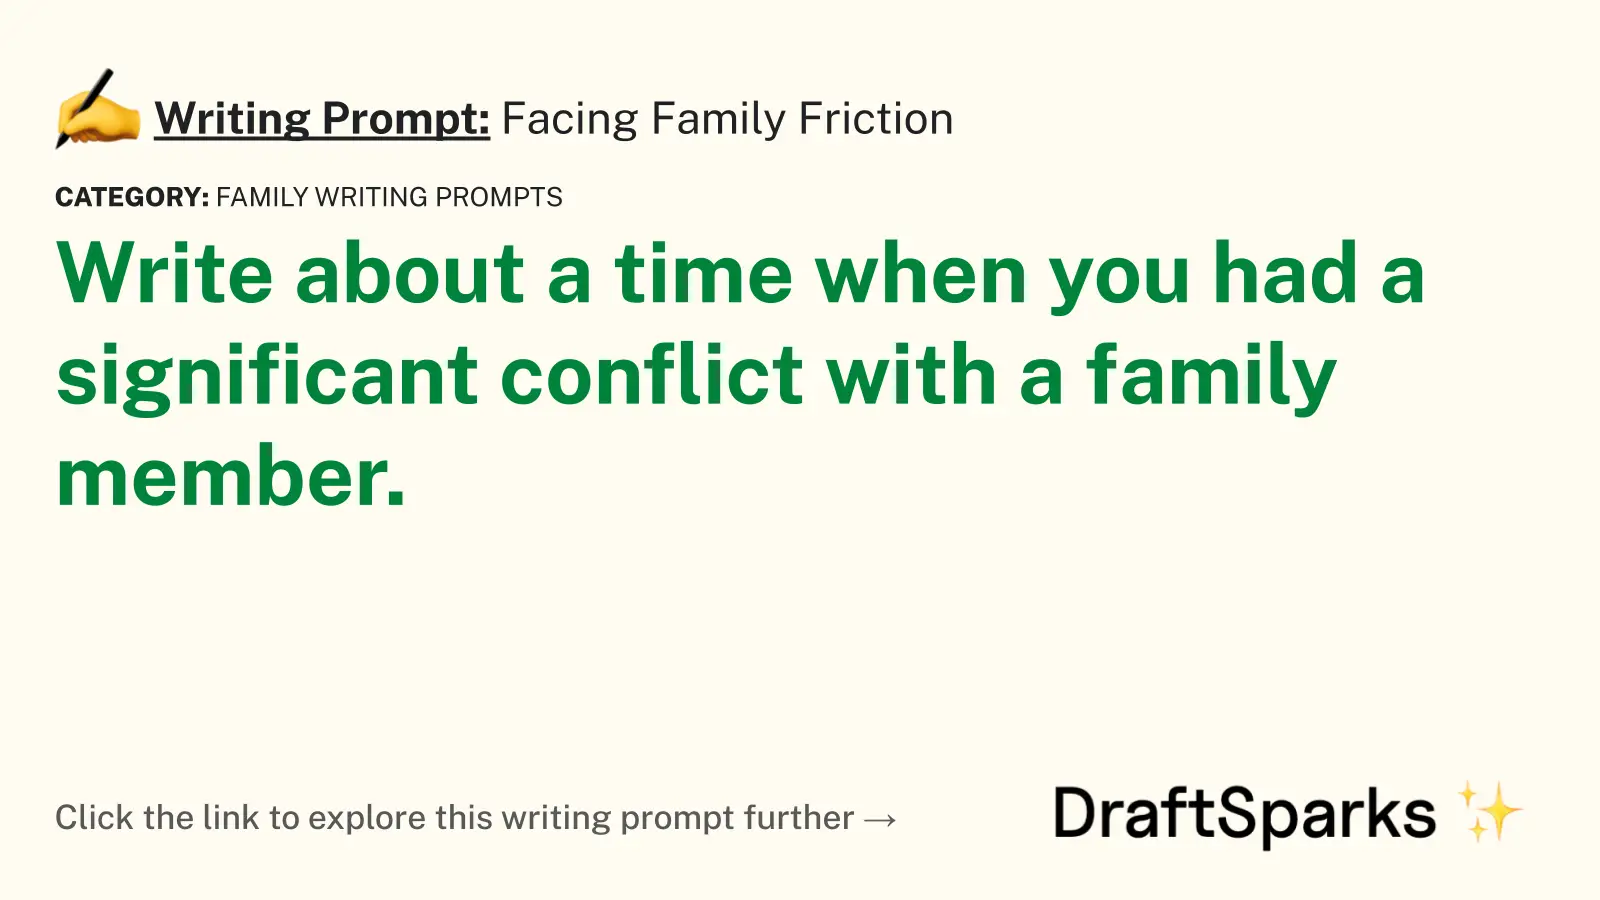 Facing Family Friction